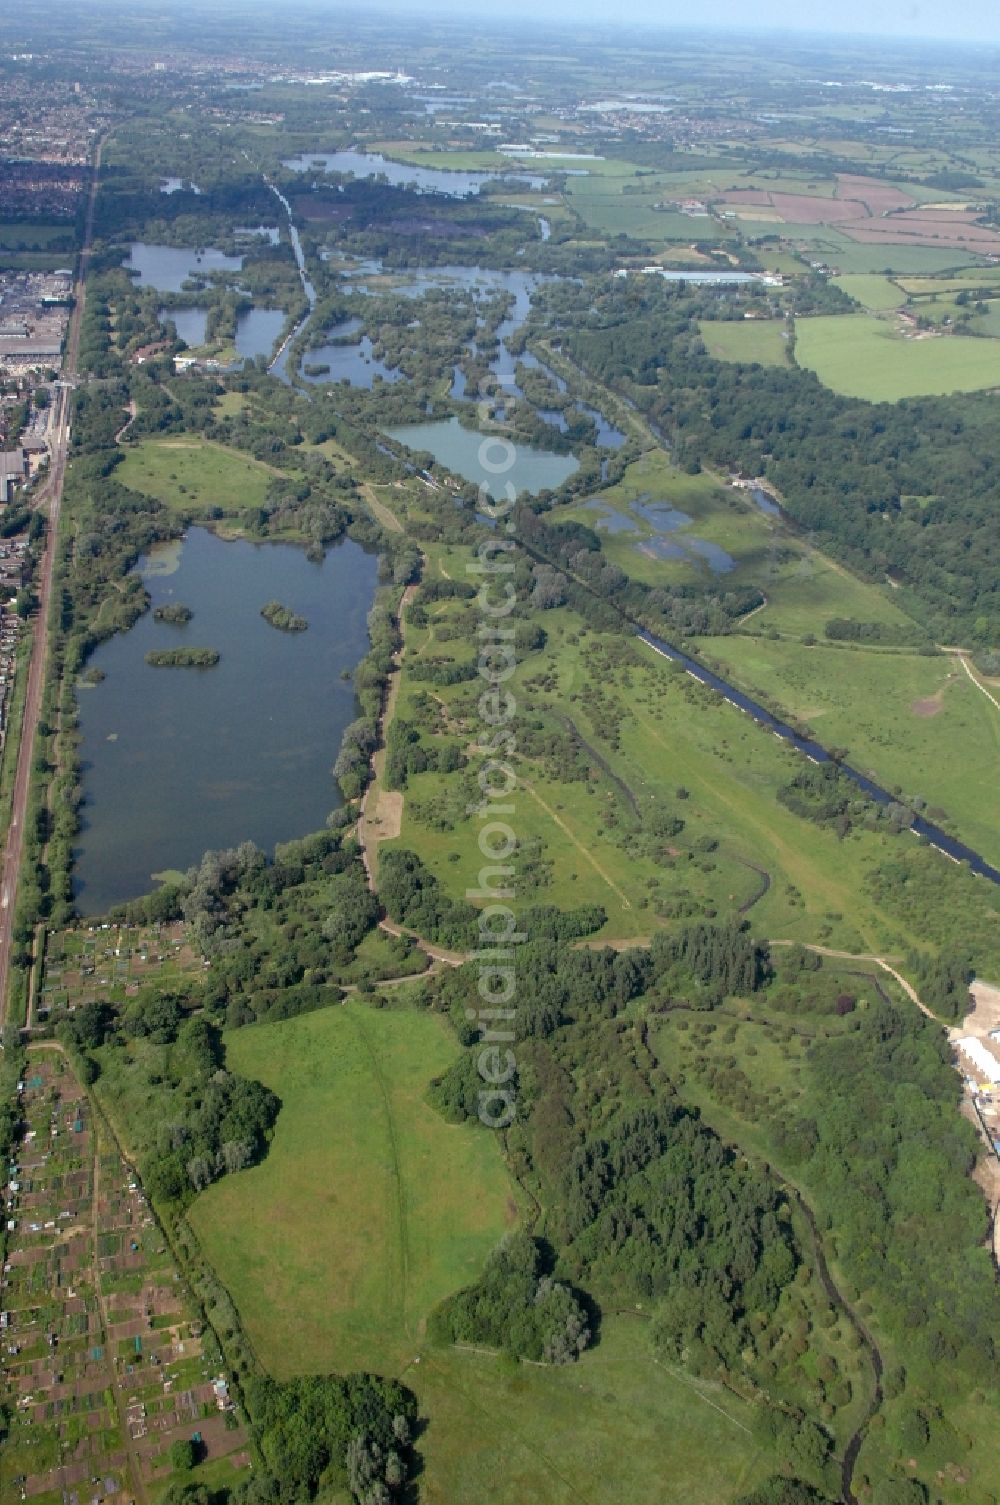 Aerial photograph Waltham Abbey - View at the flooded former gravel pits and the river Millhead Stream in Waltham Abbey Woods between Cheshunt and Waltham Abbey in the county of Essex in the UK. The floodplain area serves as a water reservoir and recreation area with a water sports school, the Herts Young Mariners Base. Among others, here in the Lee Valley Park, the Olympic events held in kayaking and canoeing